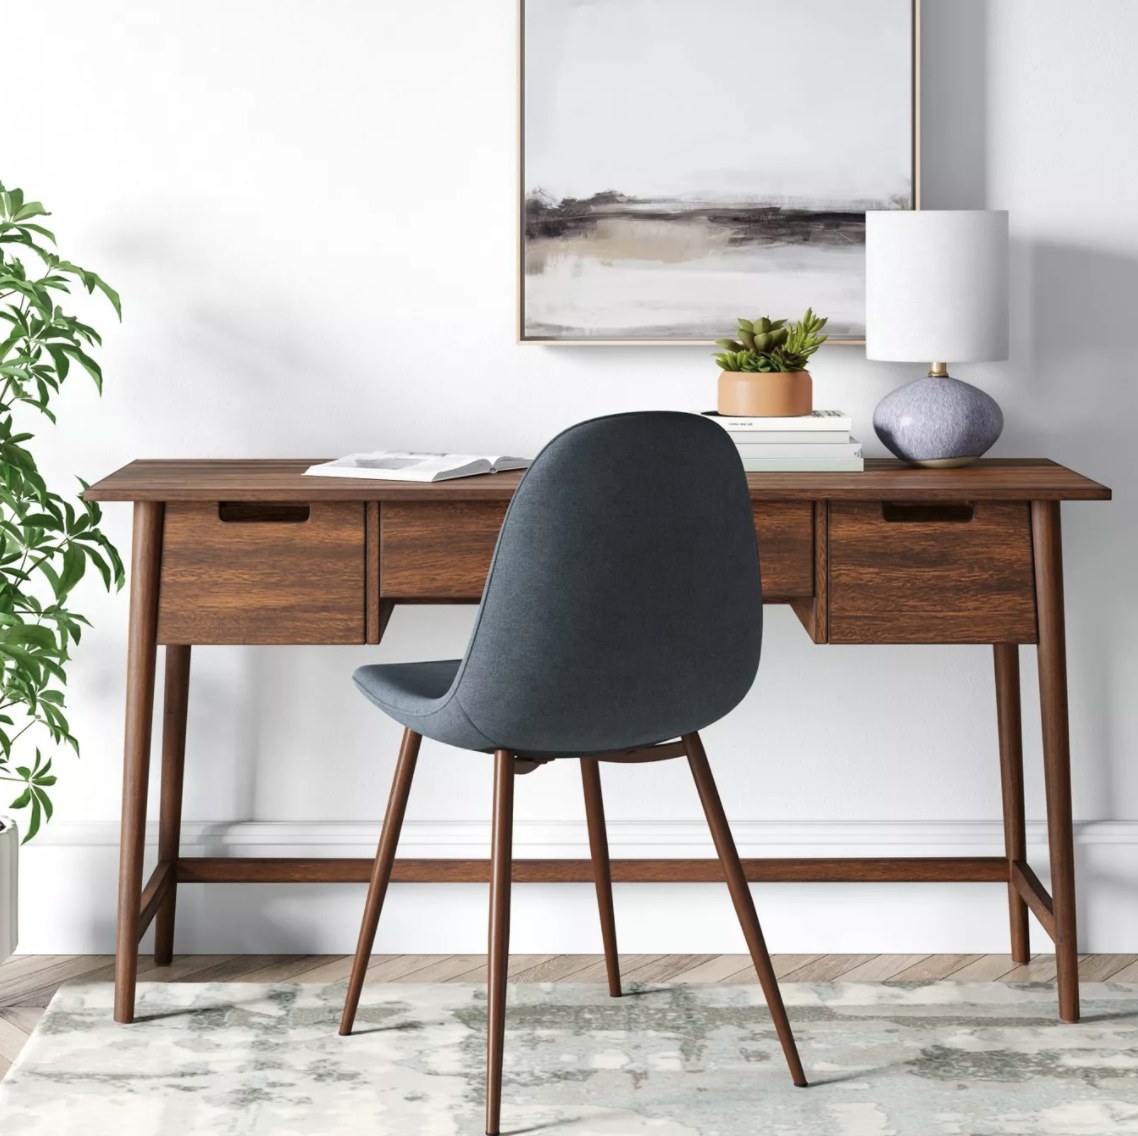 wooden desk with chair